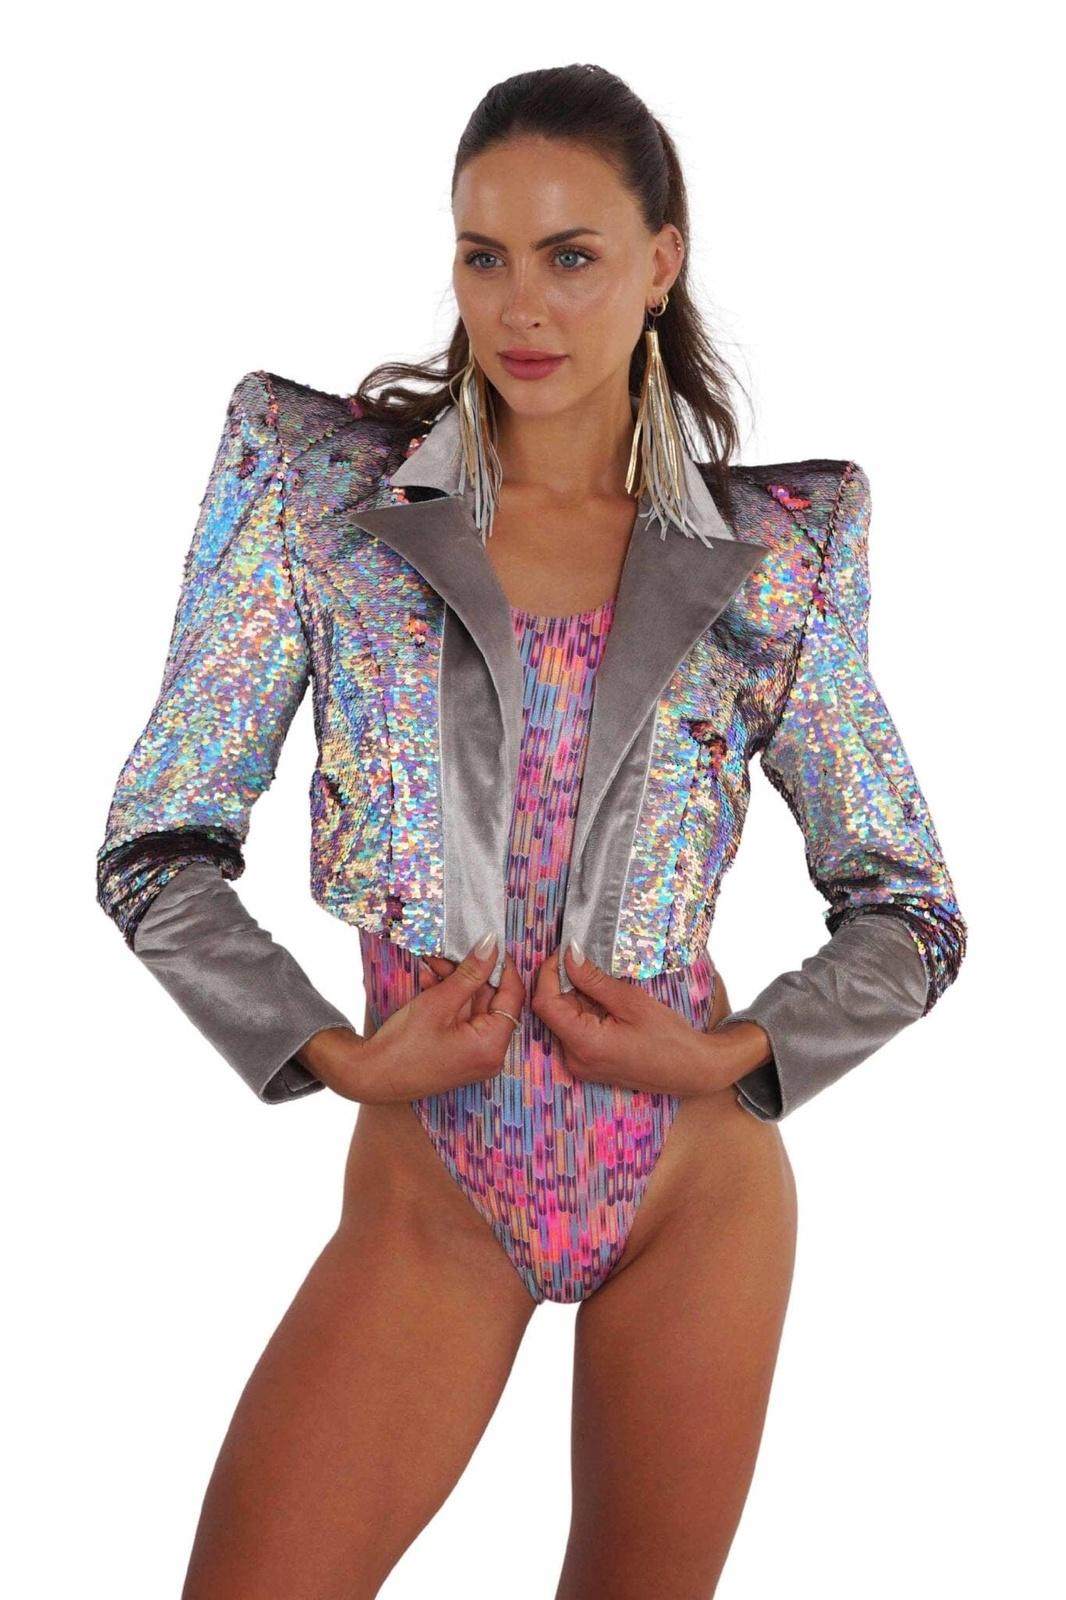 holographic silver crop sequin jacket with big shoulders from Love Khaos